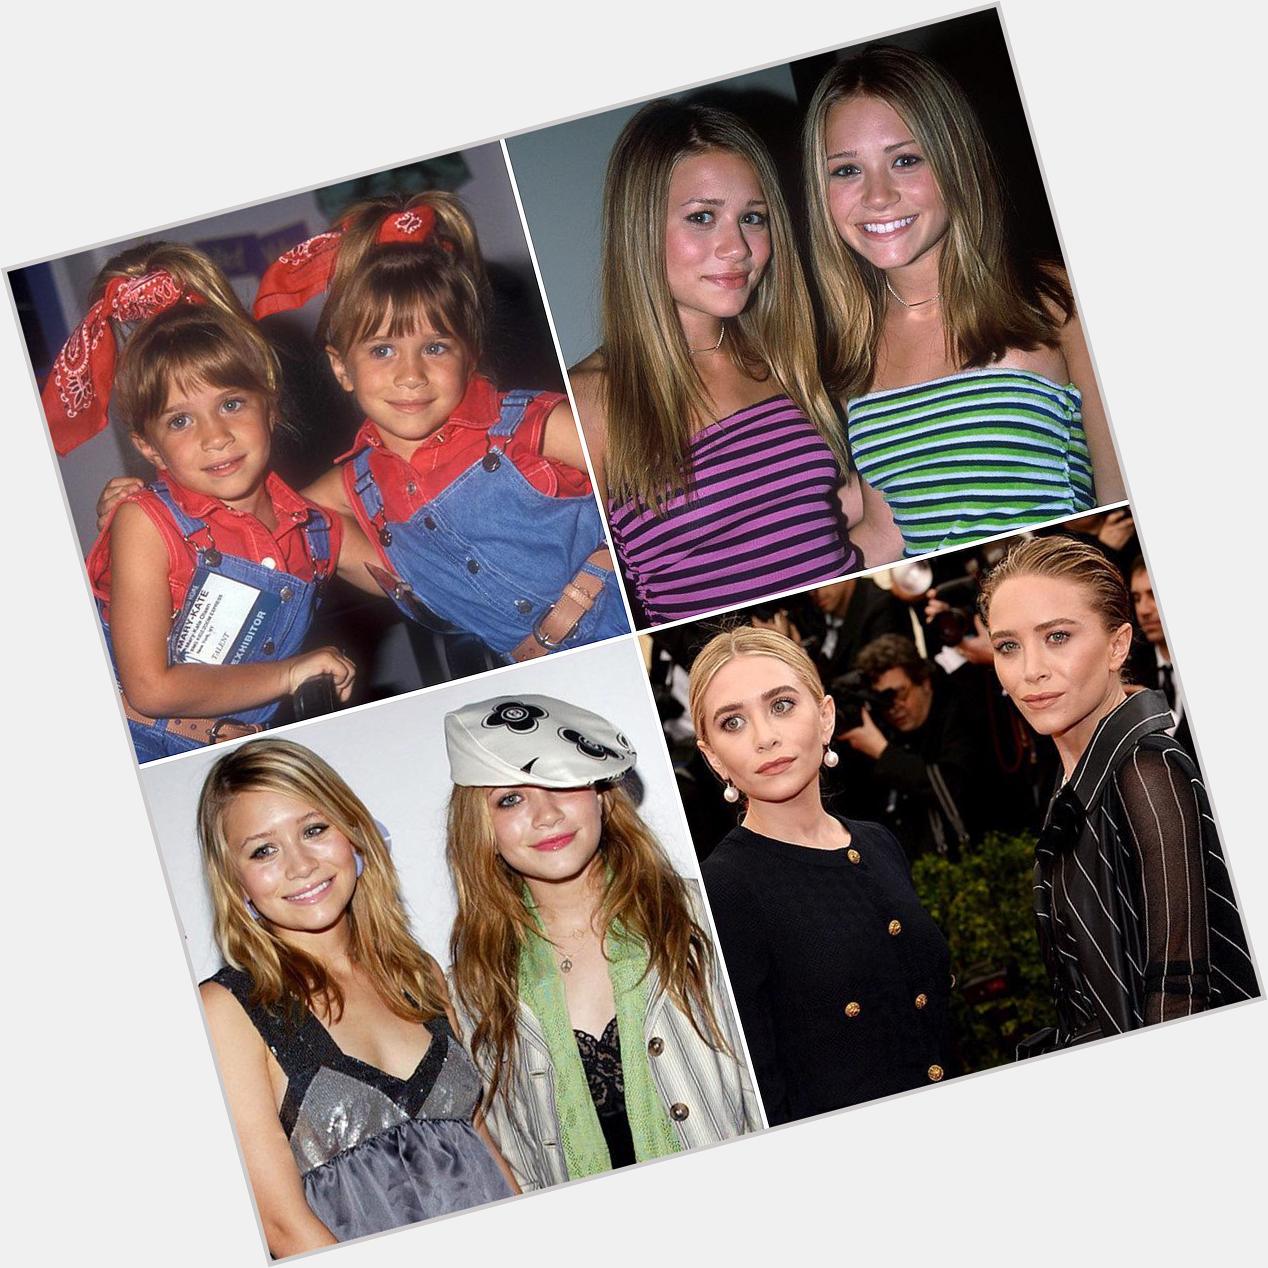 Happy birthday to the timeless style icons mary kate & ashley olsen. you guys are 90s legends & modern day queens 